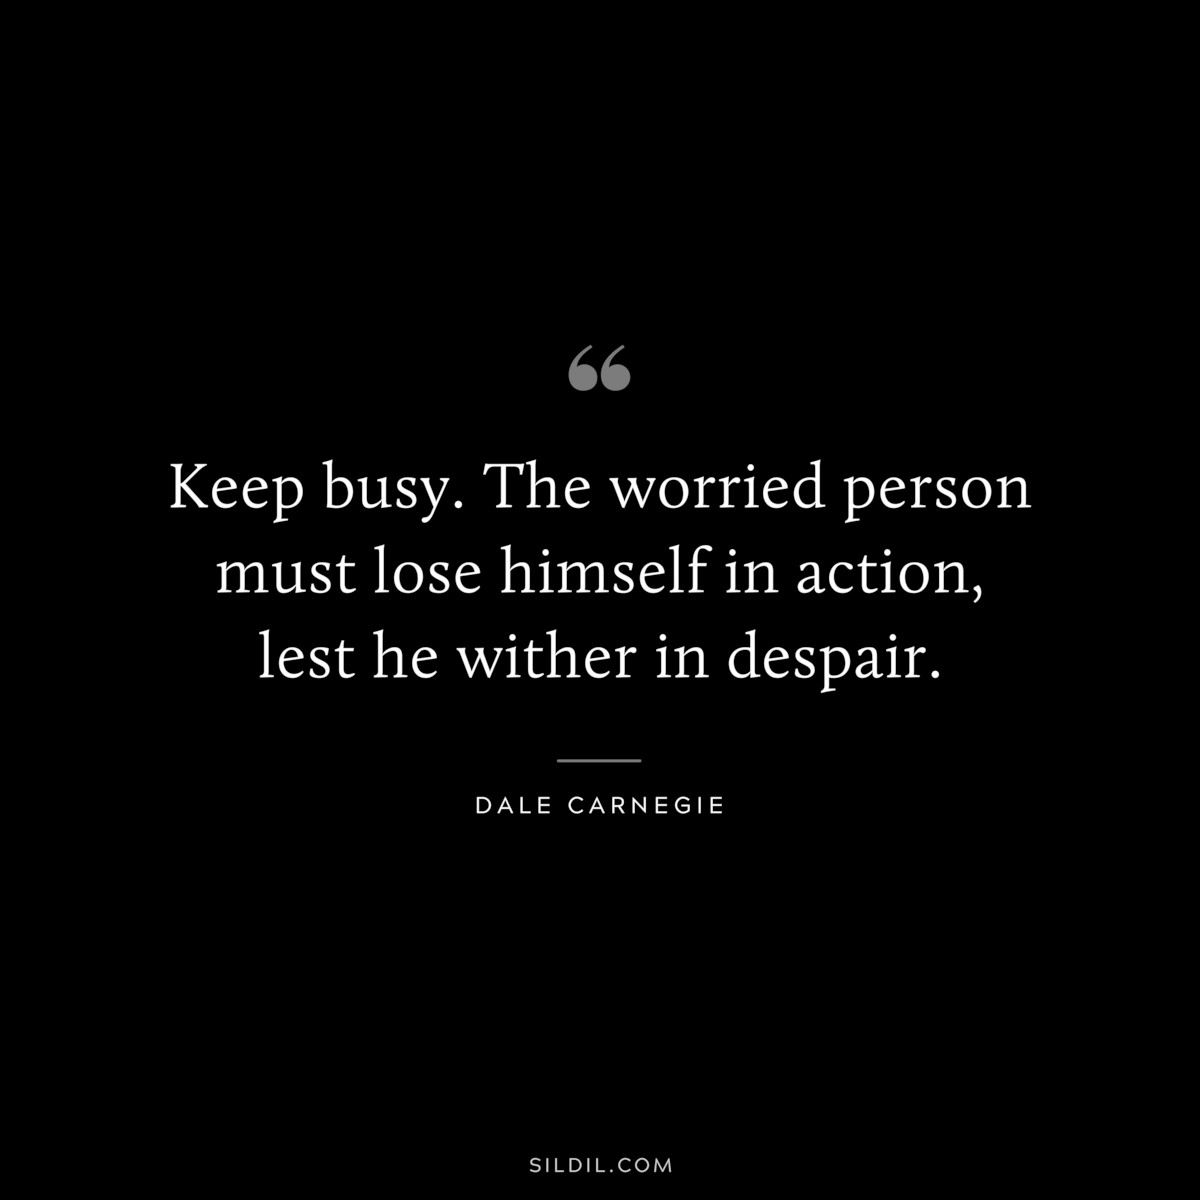 Keep busy. The worried person must lose himself in action, lest he wither in despair.― Dale Carnegie